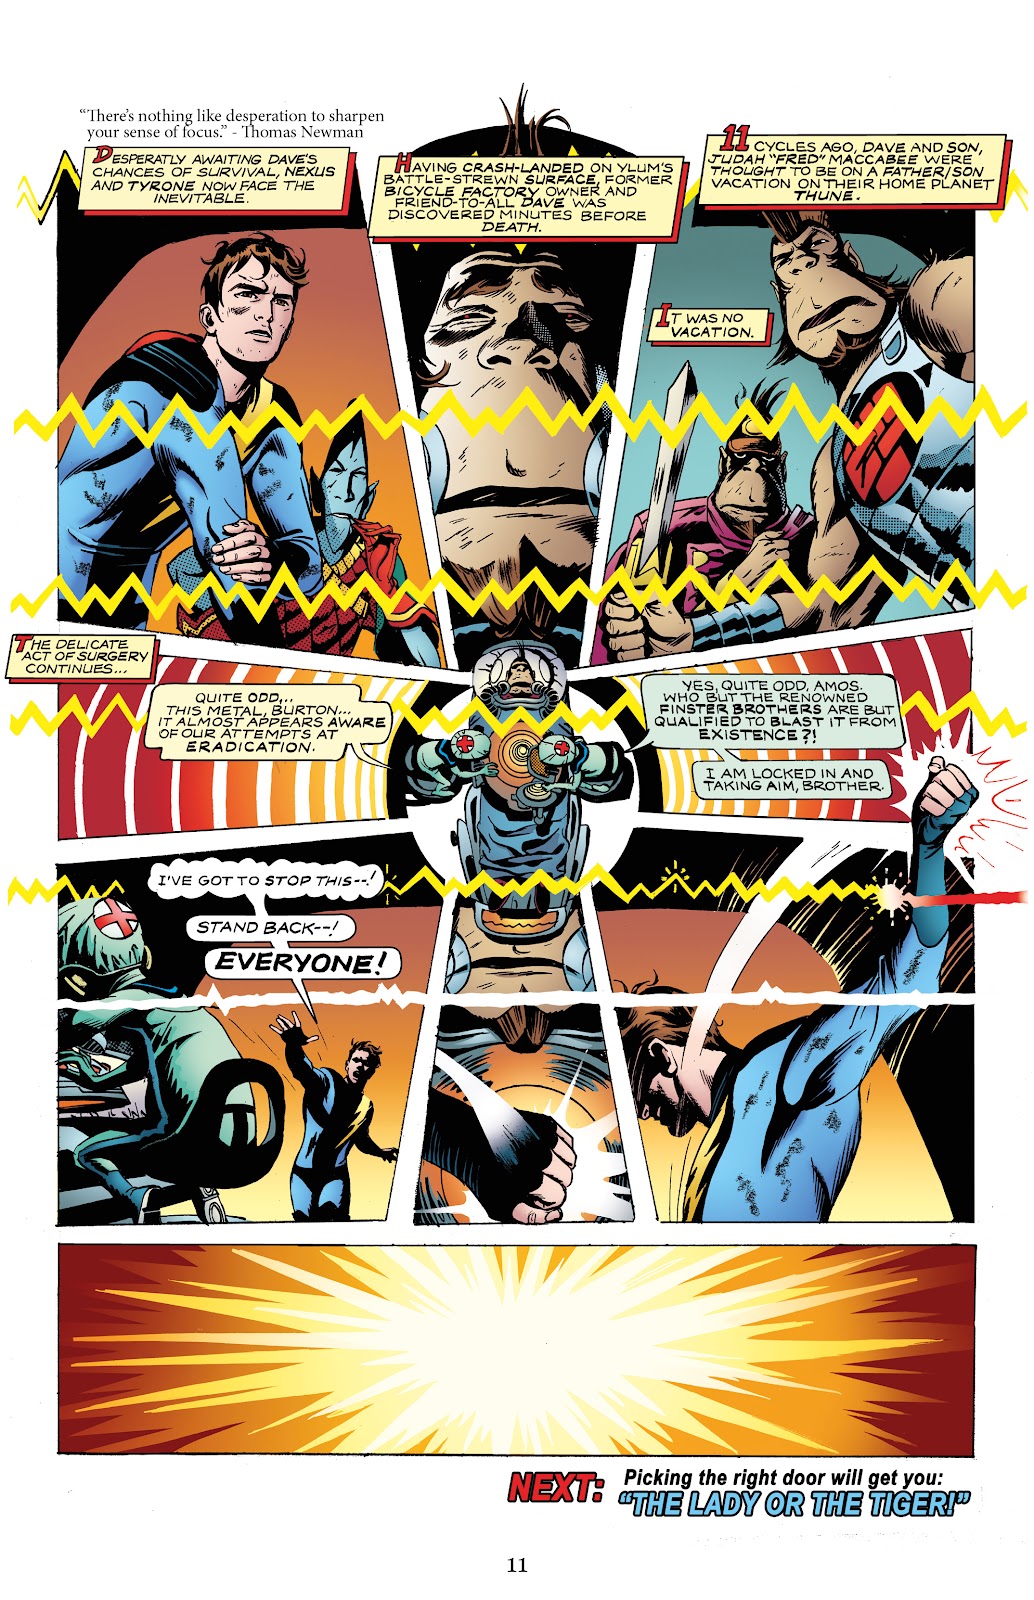 Nexus Newspaper Strips Vol 2: The Battle For Thuneworld issue 1 - Page 13